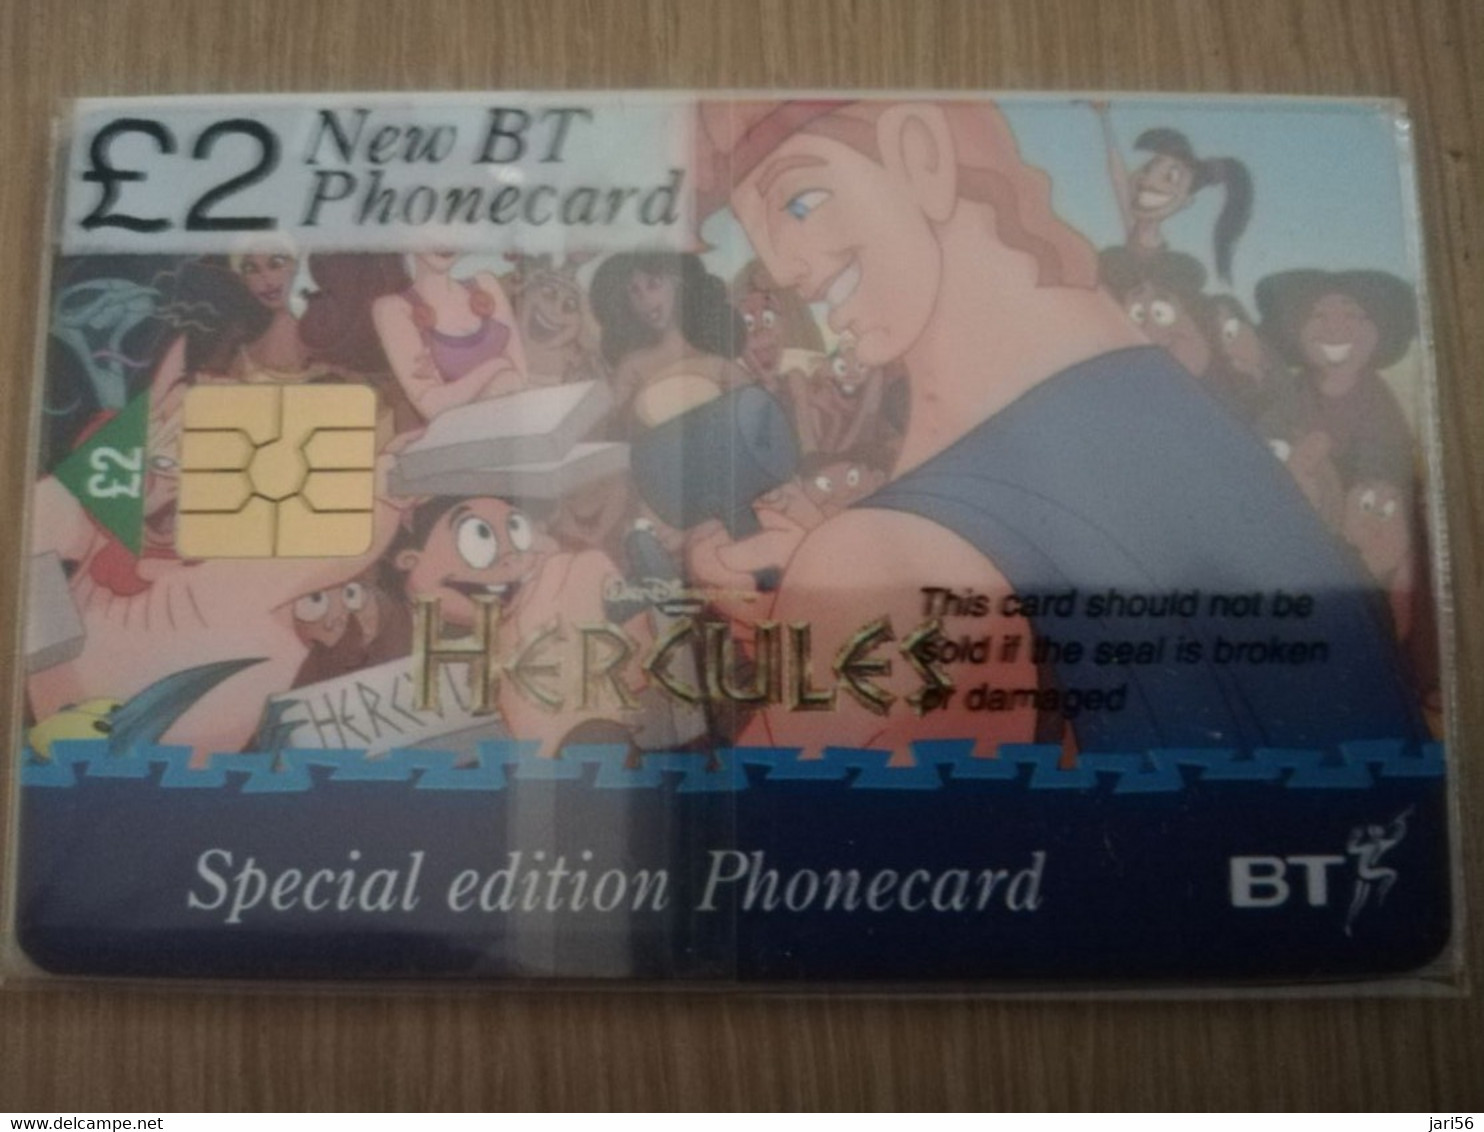 GREAT BRETAGNE  CHIPCARDS HERCULES/ DISNEY  SERIE 6X 2 POUND sealed in wrapper    MINT CONDITION      **3856**